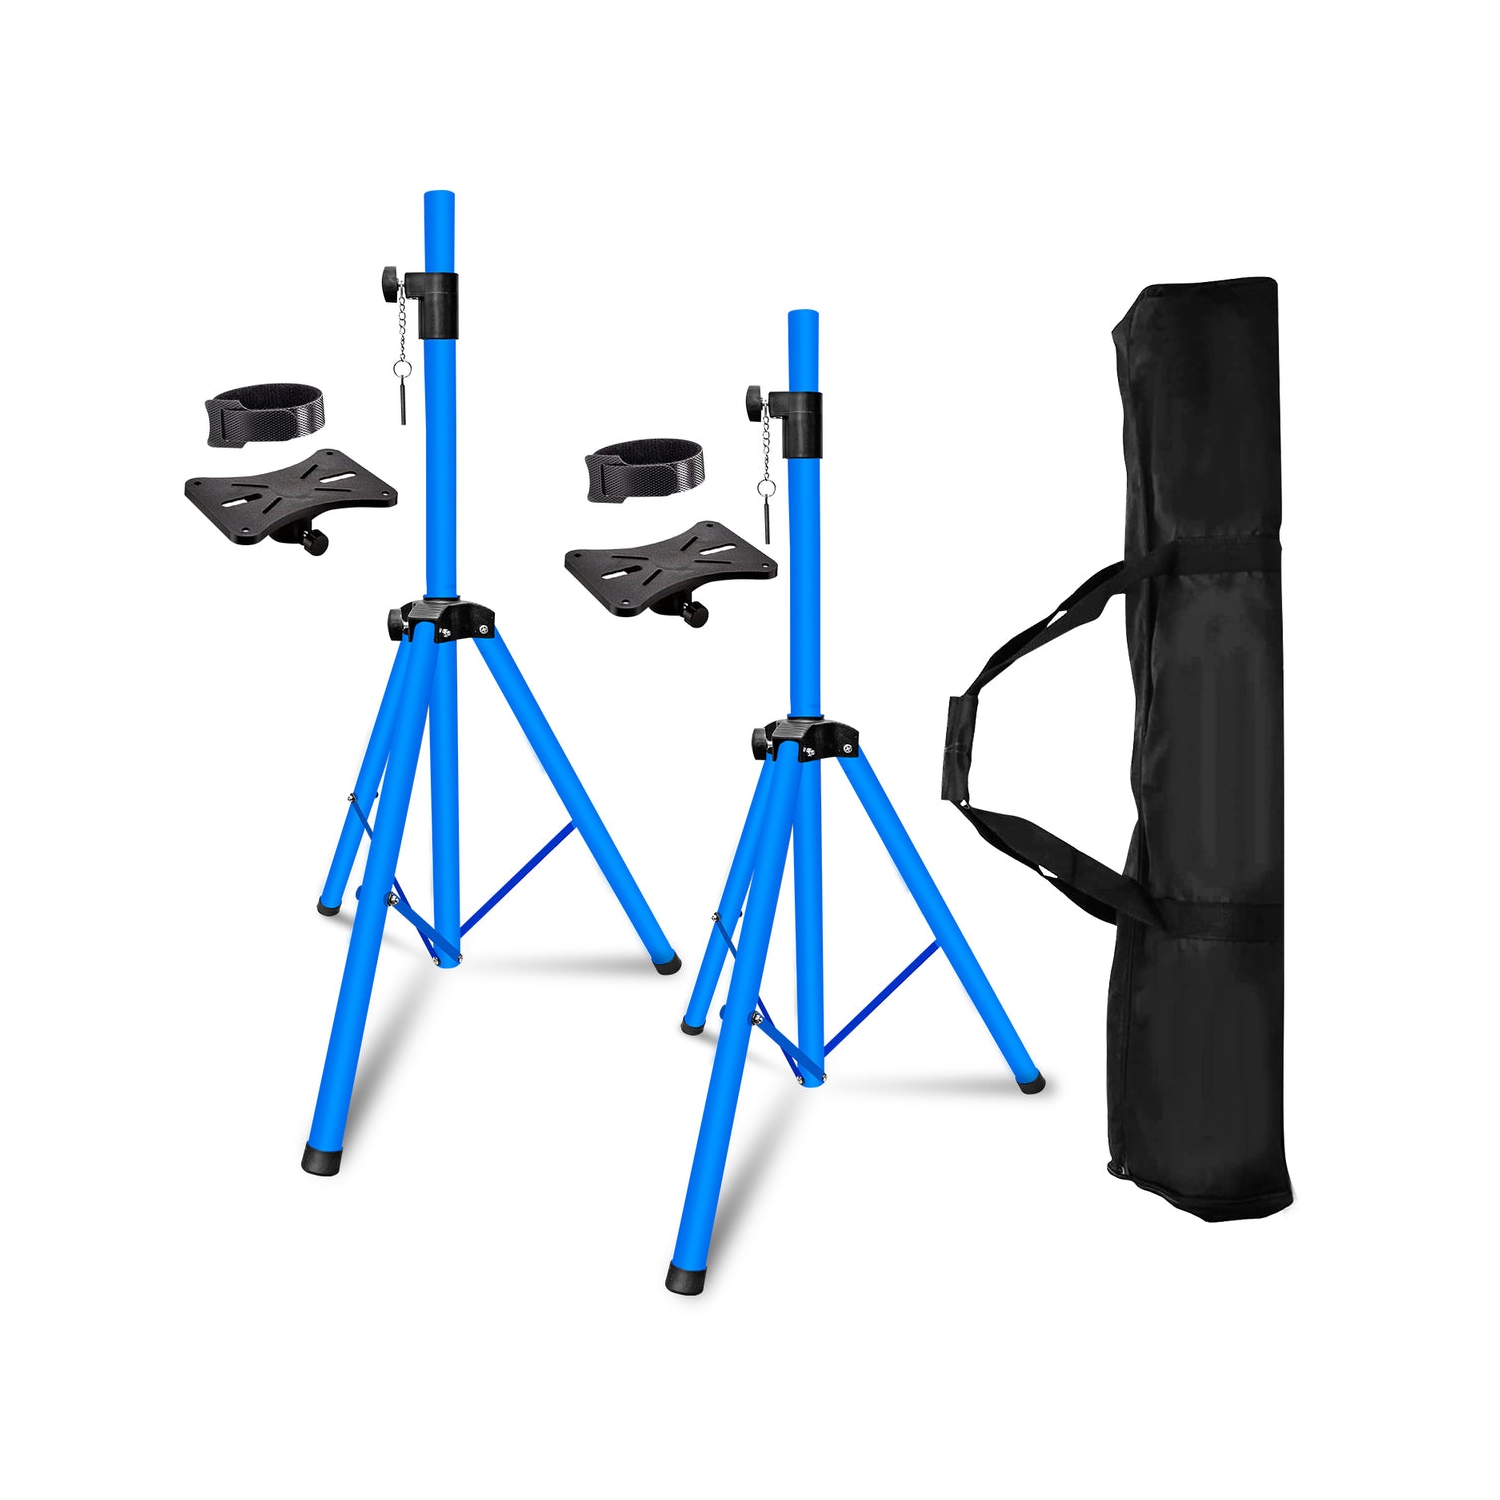 5 Core Speakers Stands 2 Pieces Sky Blue Heavy Duty Height Adjustable Tripod PA Speaker Stand For Large Speakers DJ Stand Para Bocinas Includes Carry Bag- SS HD 2 PK SKY BLU BAG